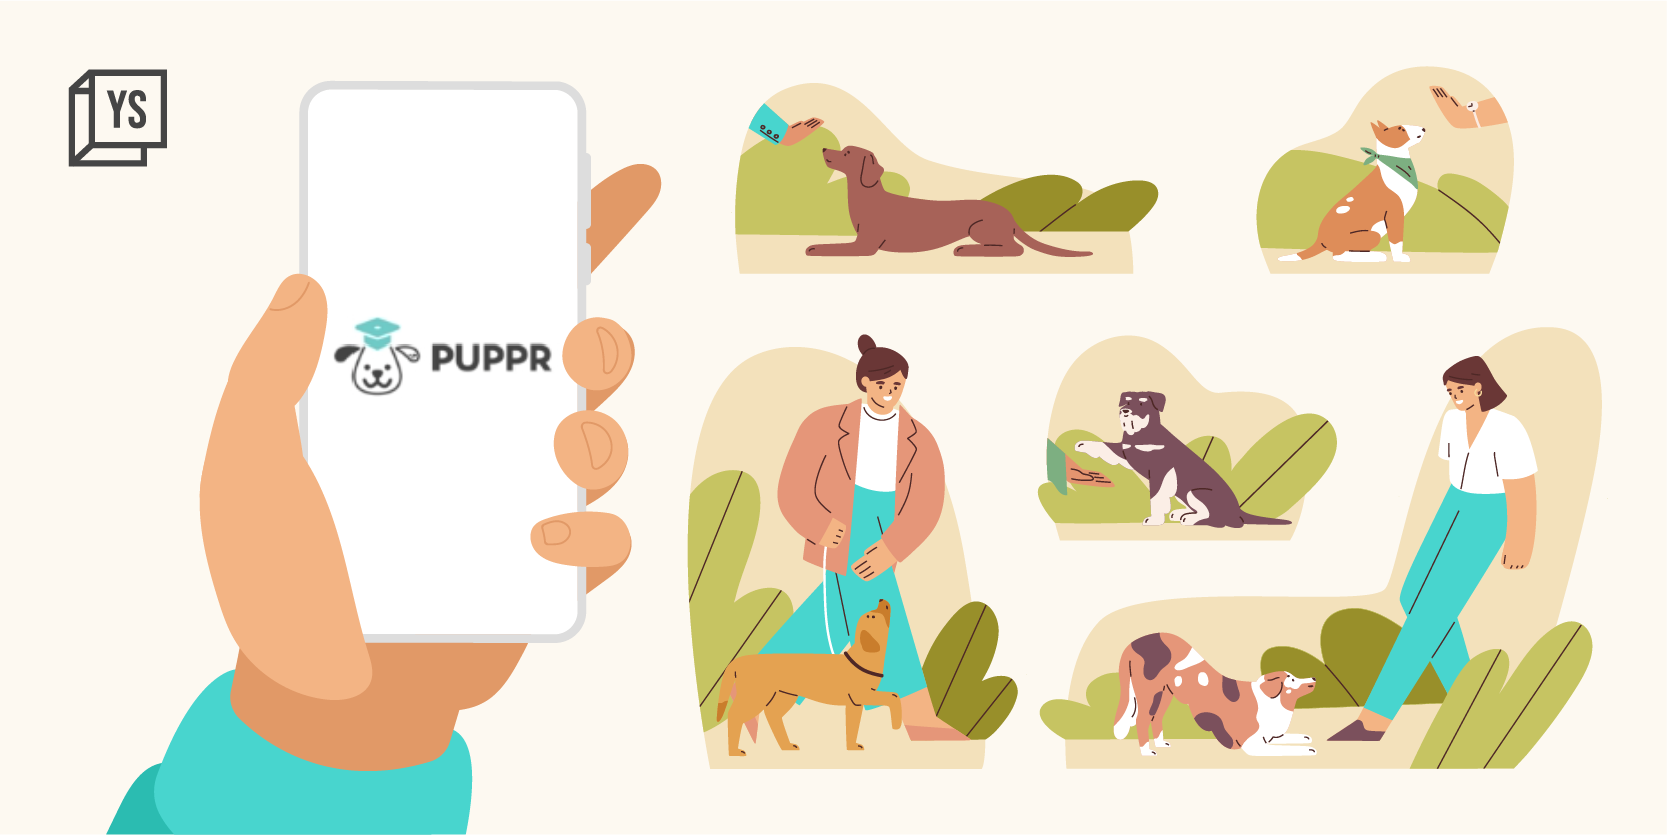 Short videos, easy instructions make Puppr an ideal app to train your dog